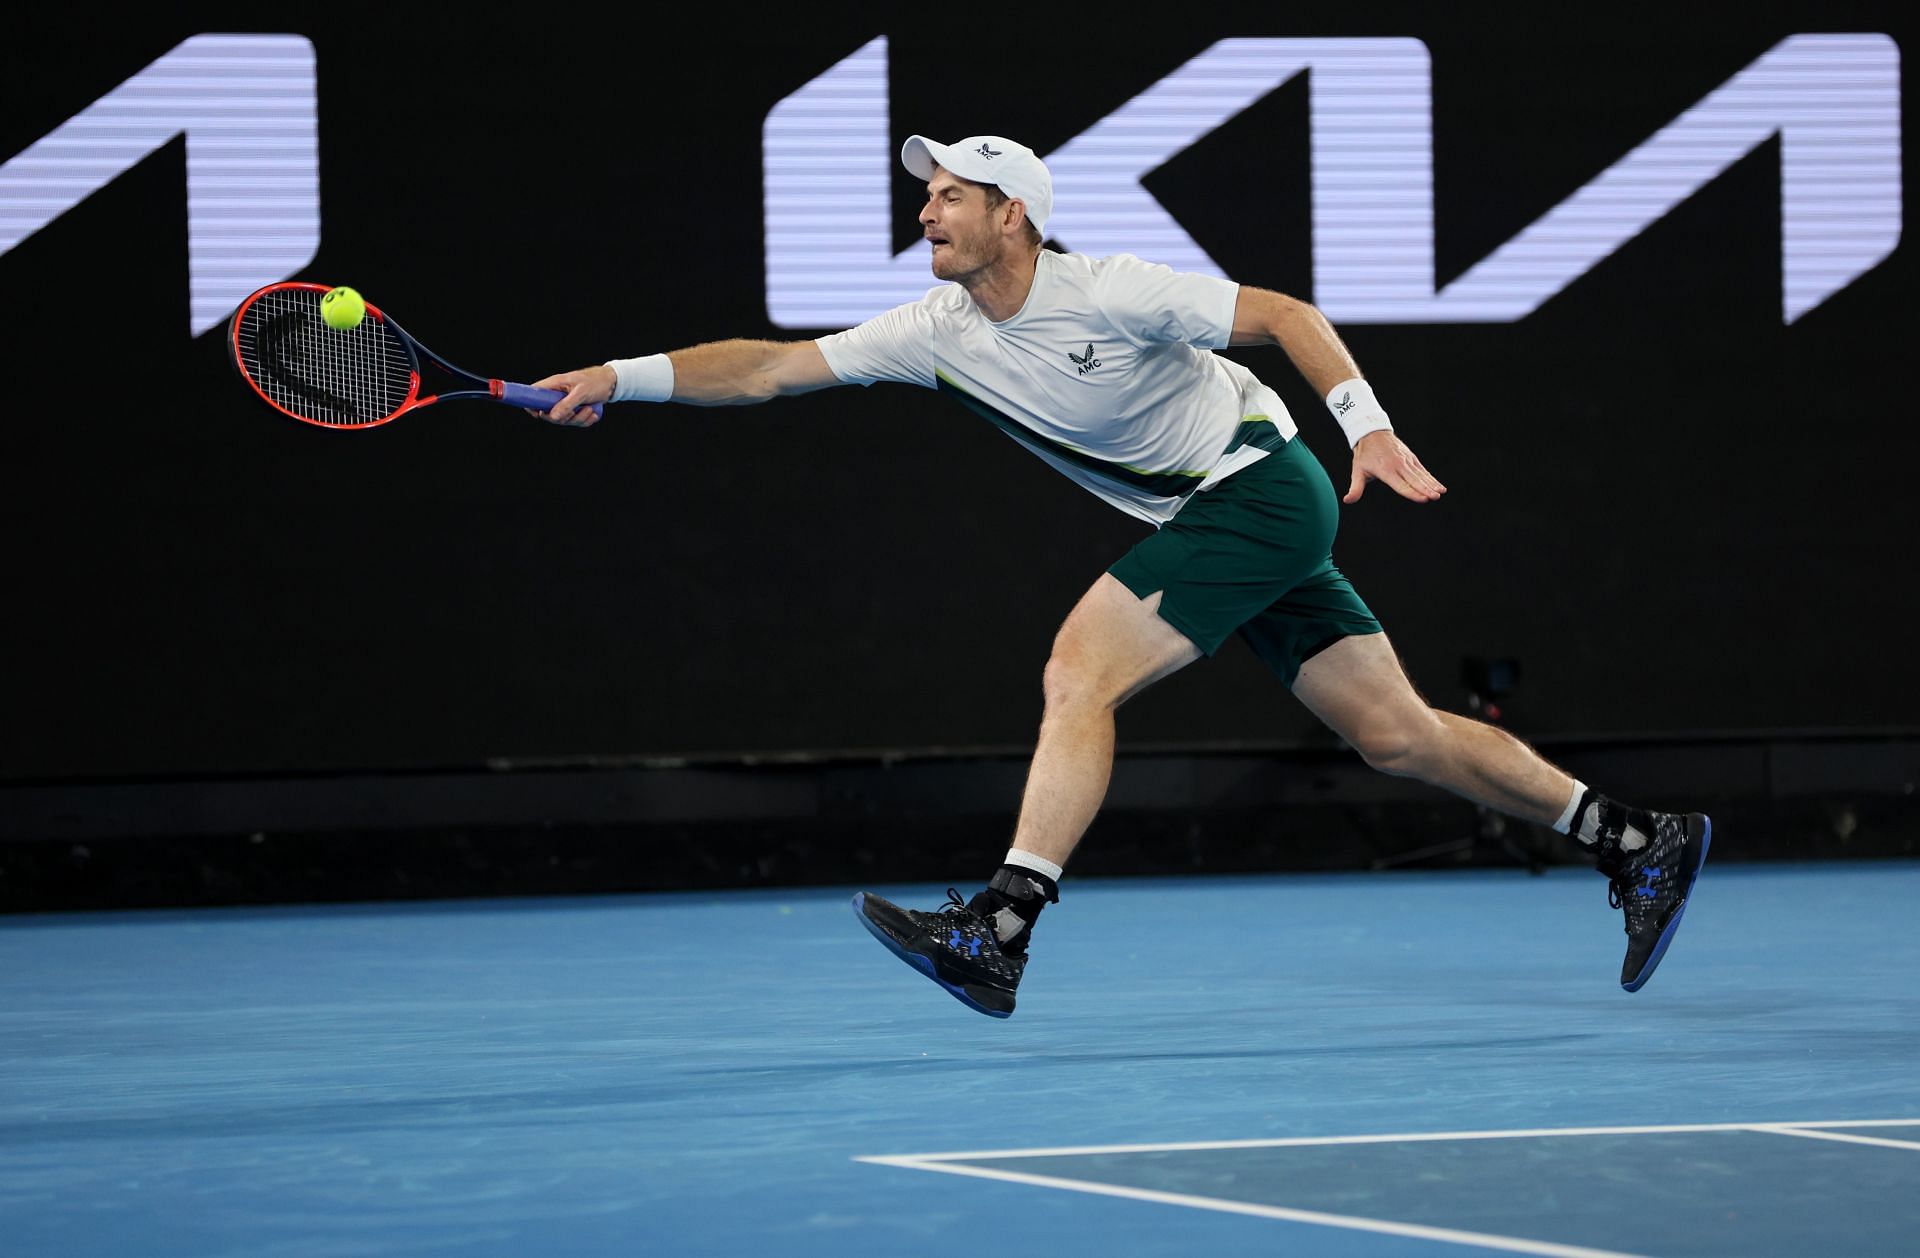 Andy Murray at the 2023 Australian Open - Day 4